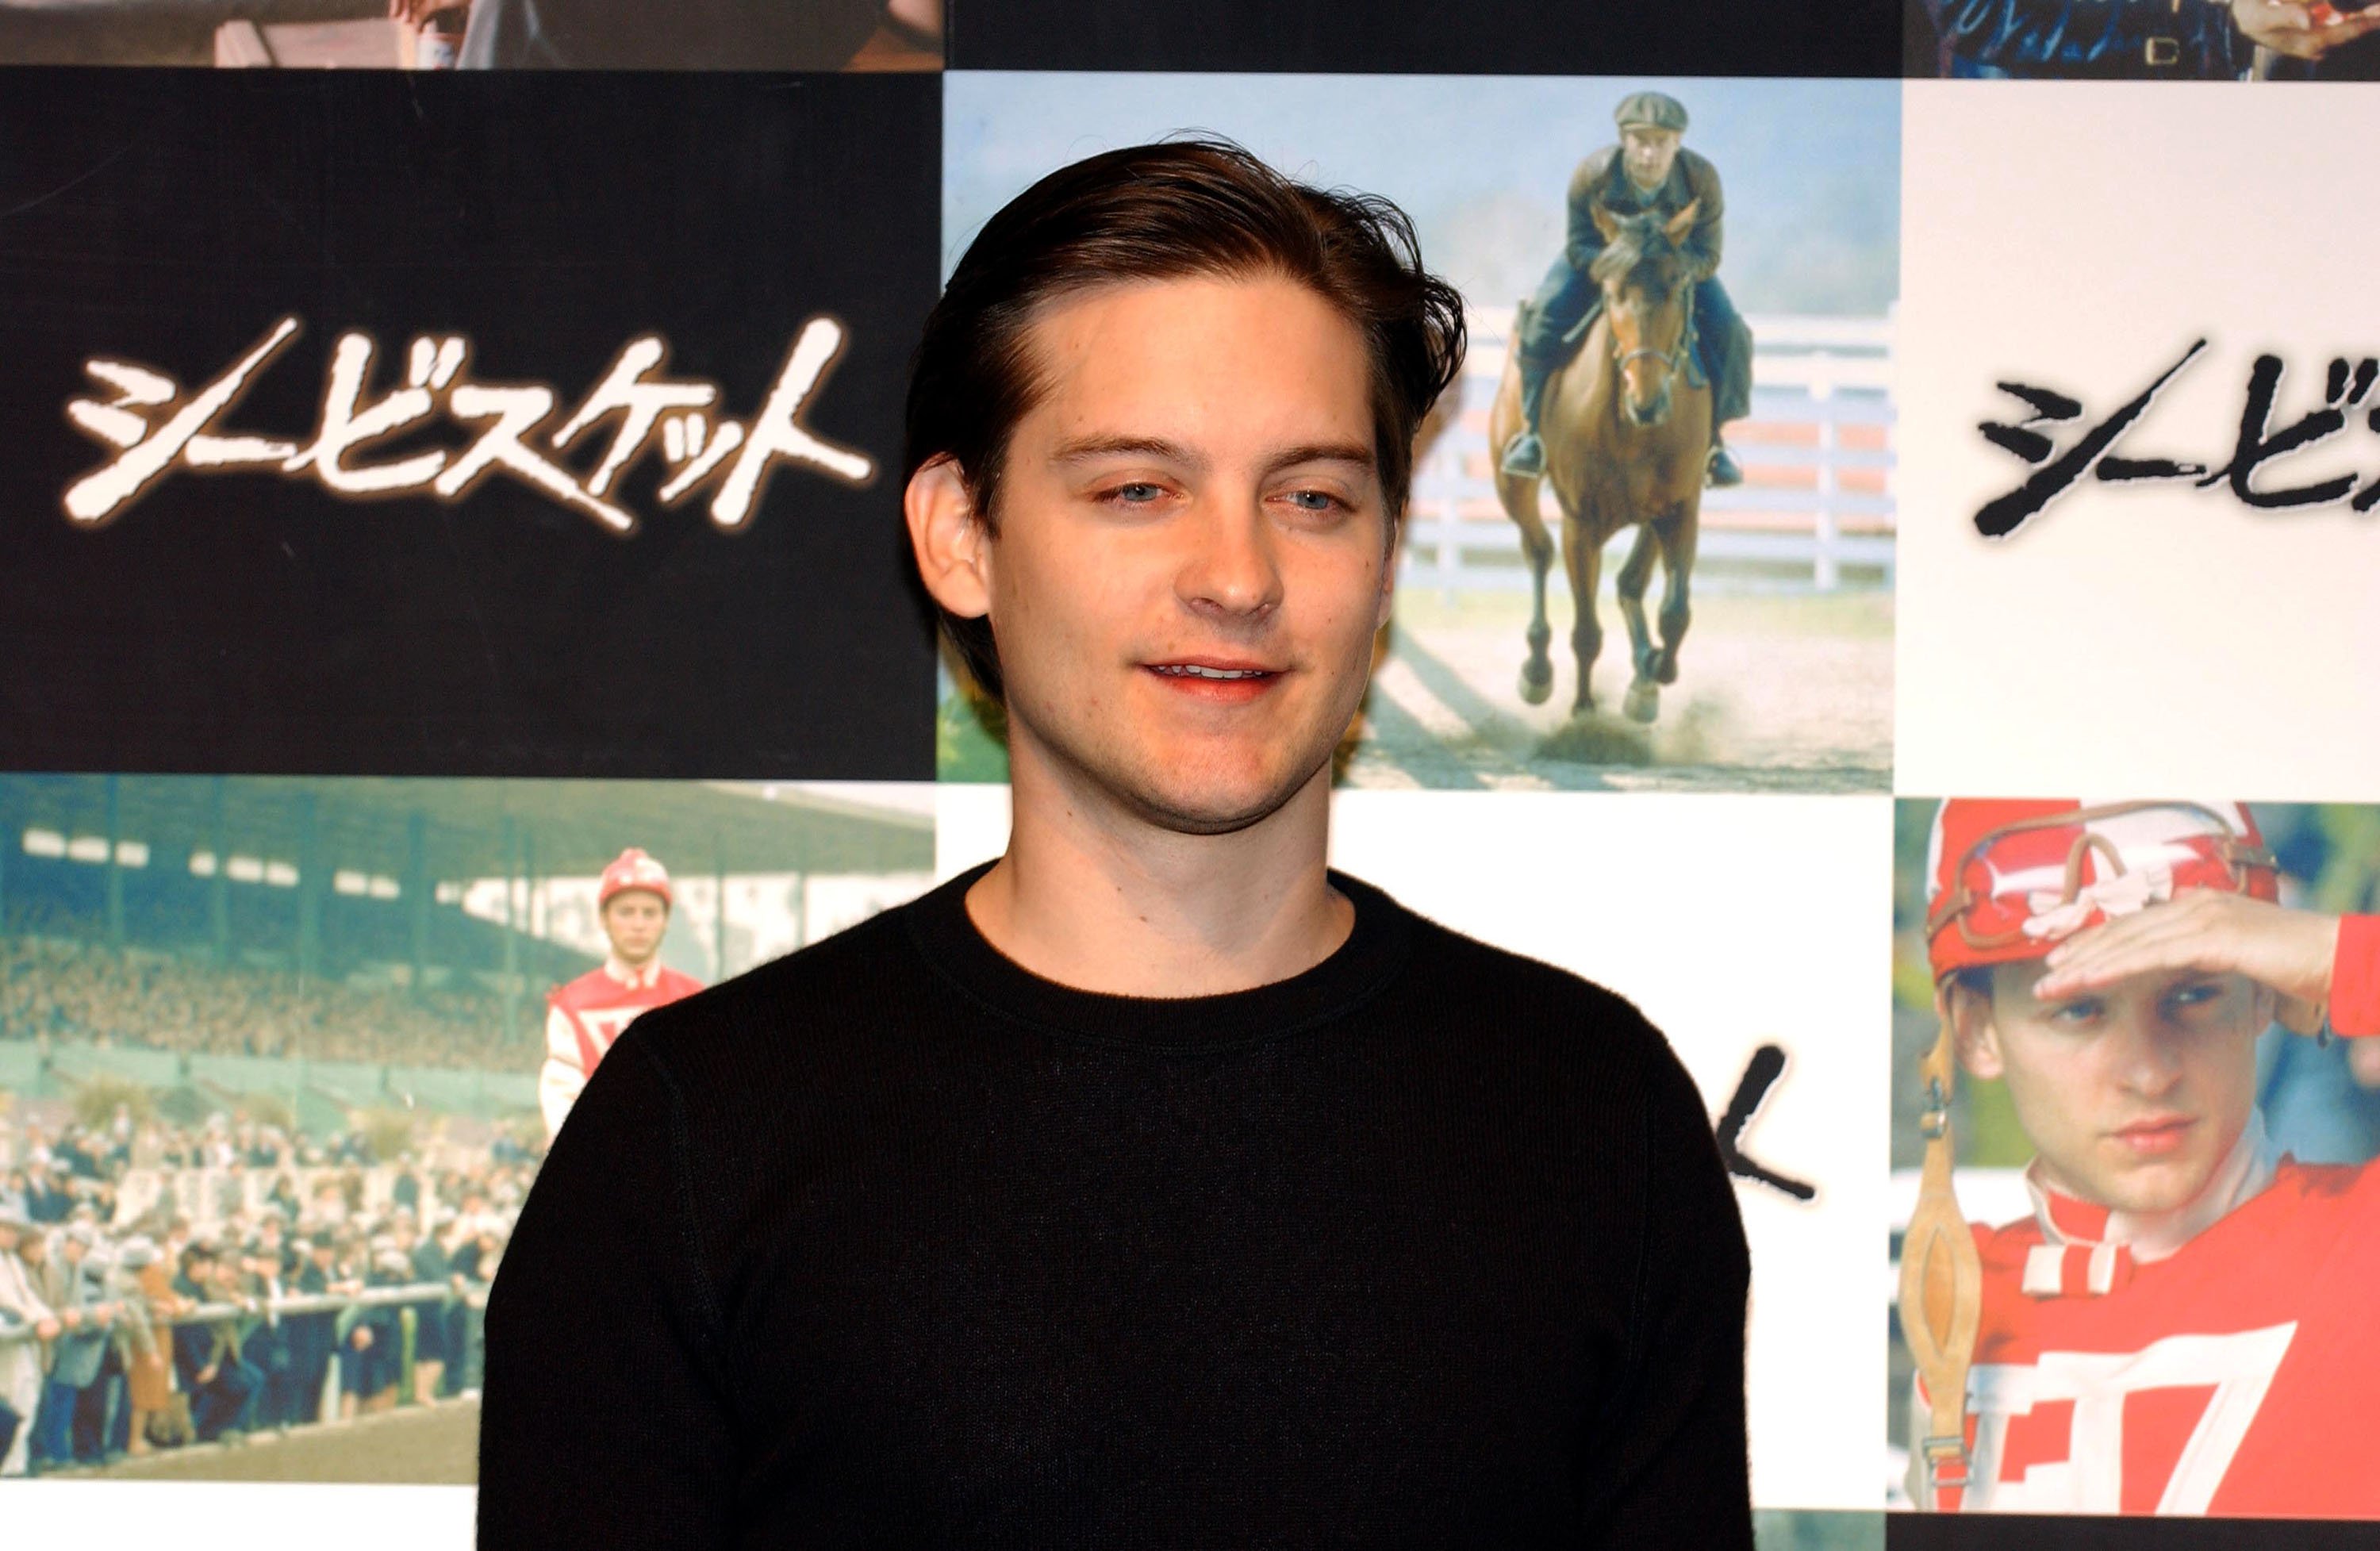 Tobey Maguire attends "Seabiscuit" press conference in Japan Park Hyatt Tokyo on January 13, 2004, in Tokyo, Japan. | Source: Getty Images